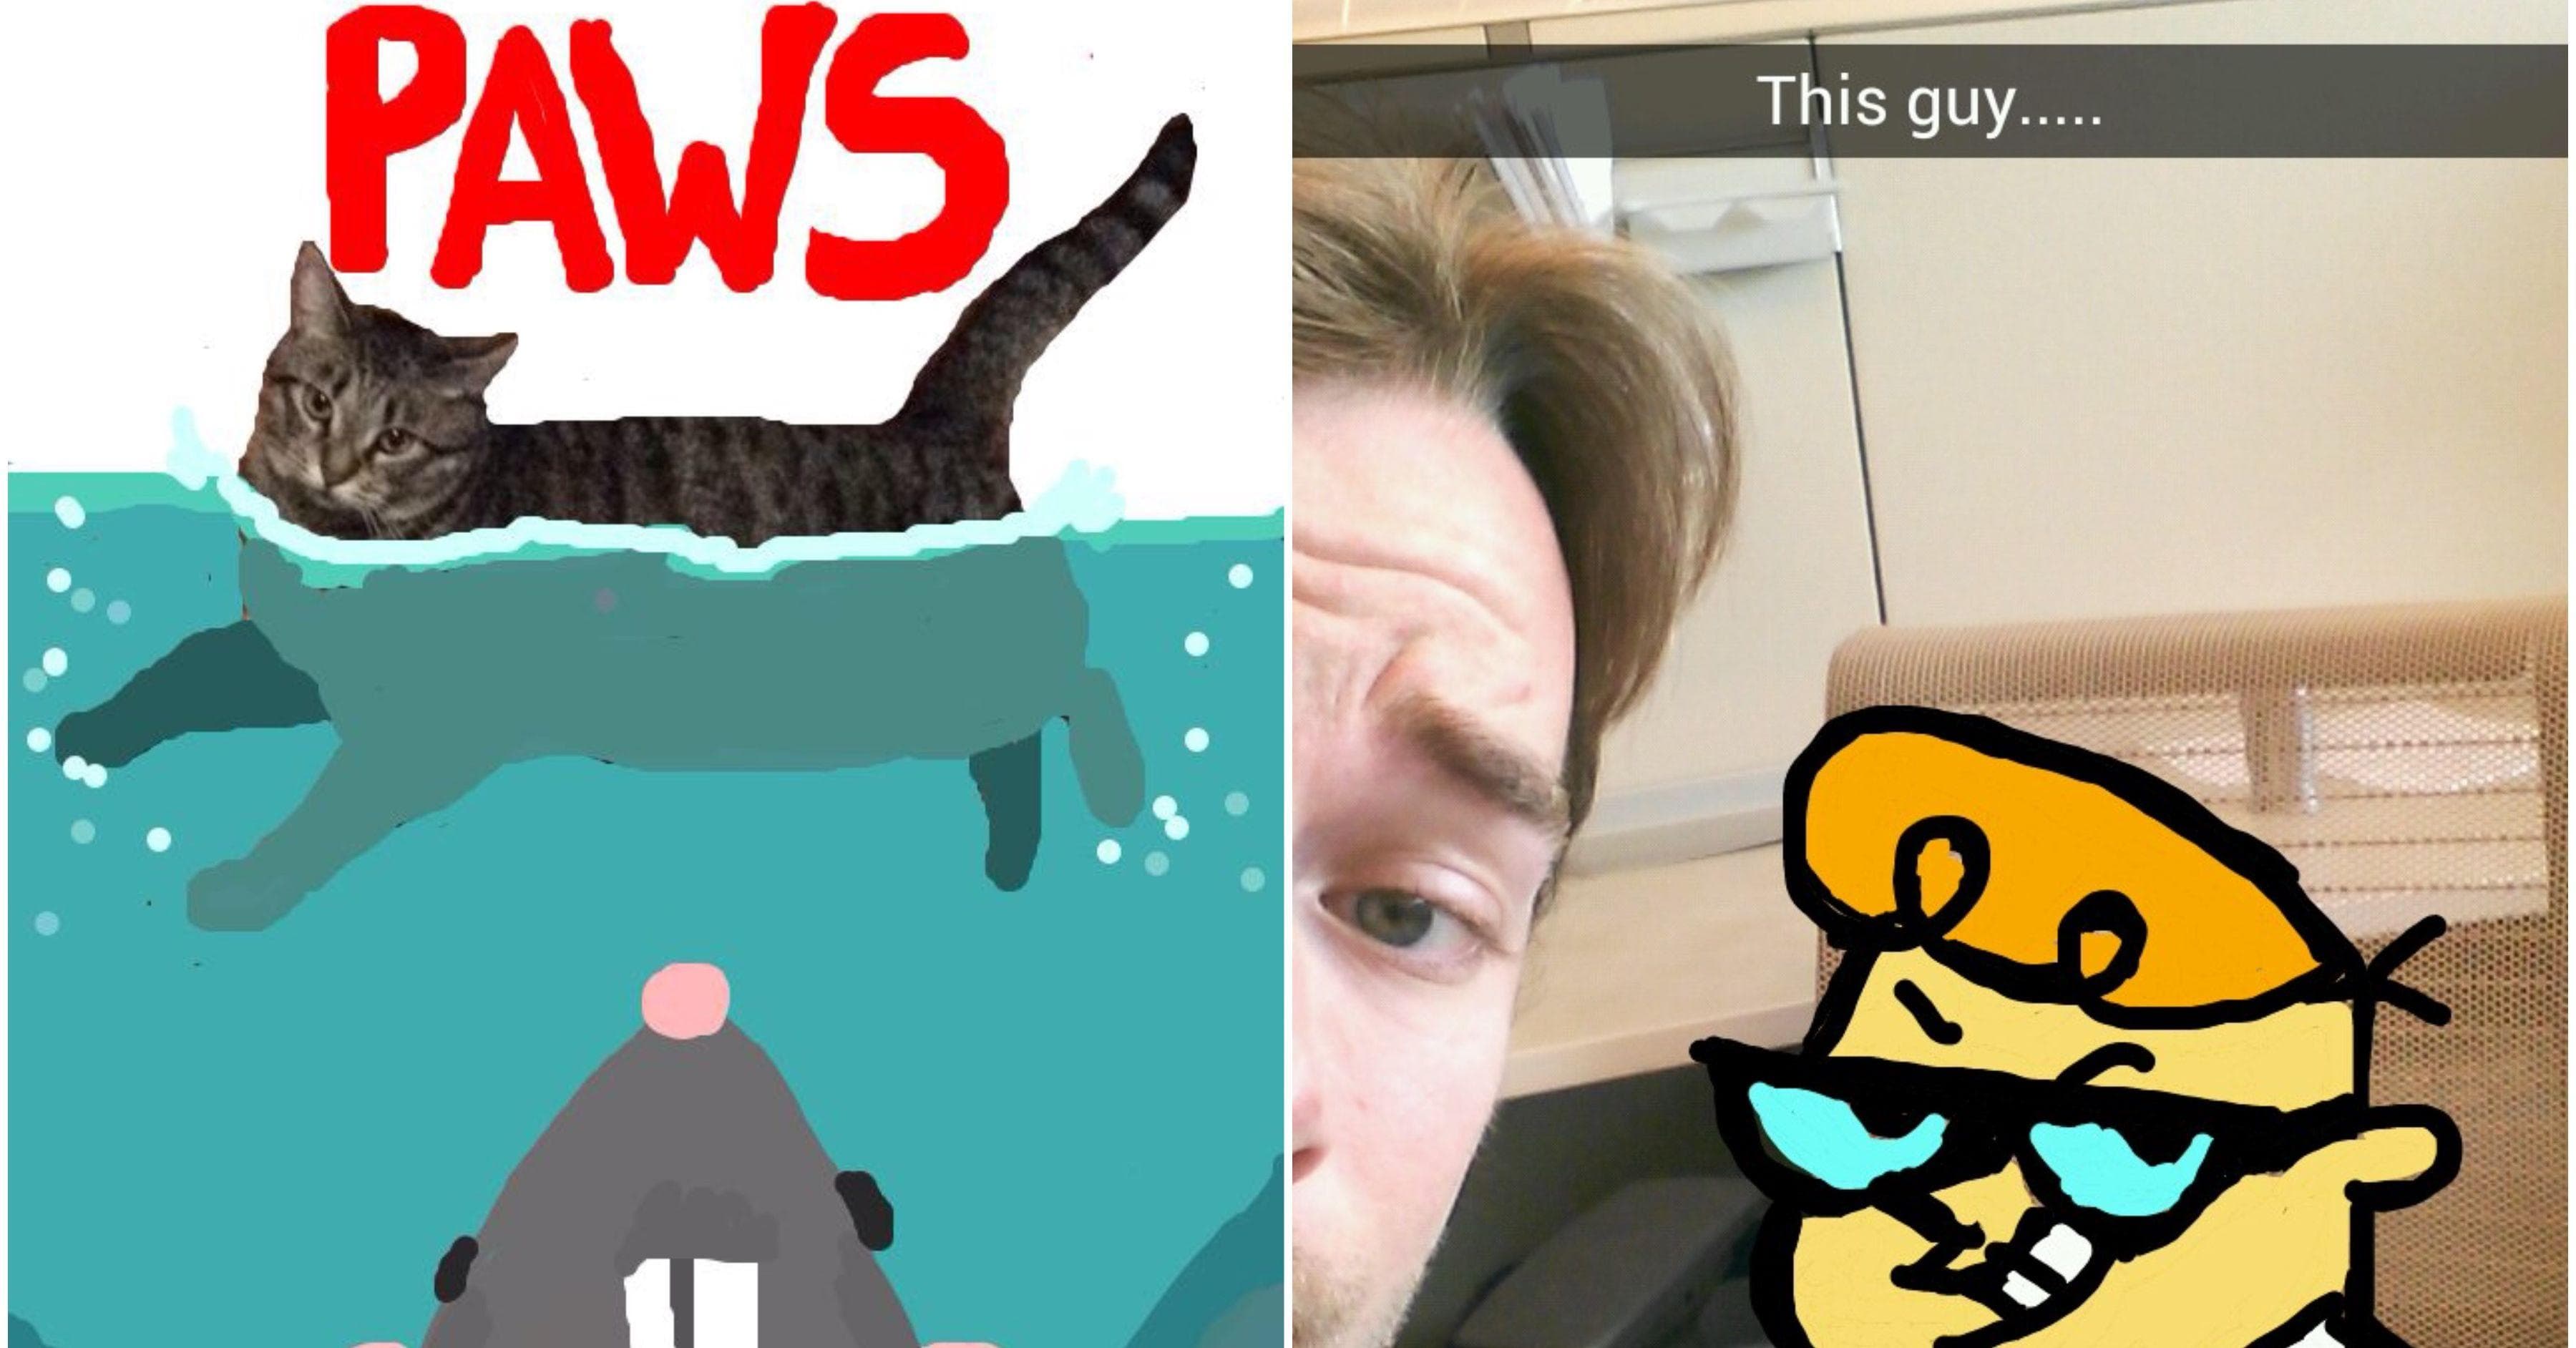 Funny Snapchat Drawings | Art in Snaps